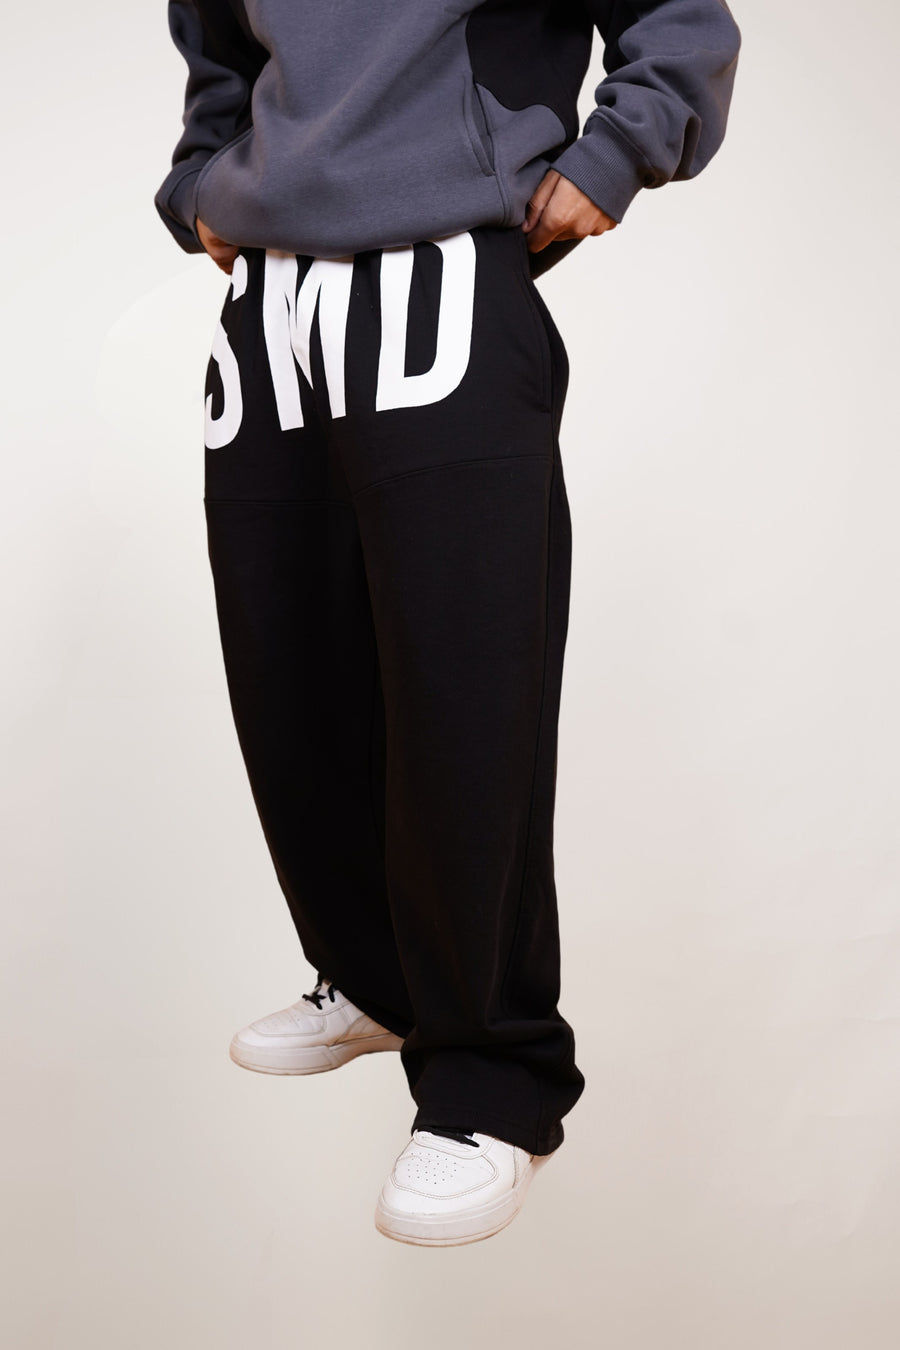 SMD Relaxed fit sweat pants For Men And Women